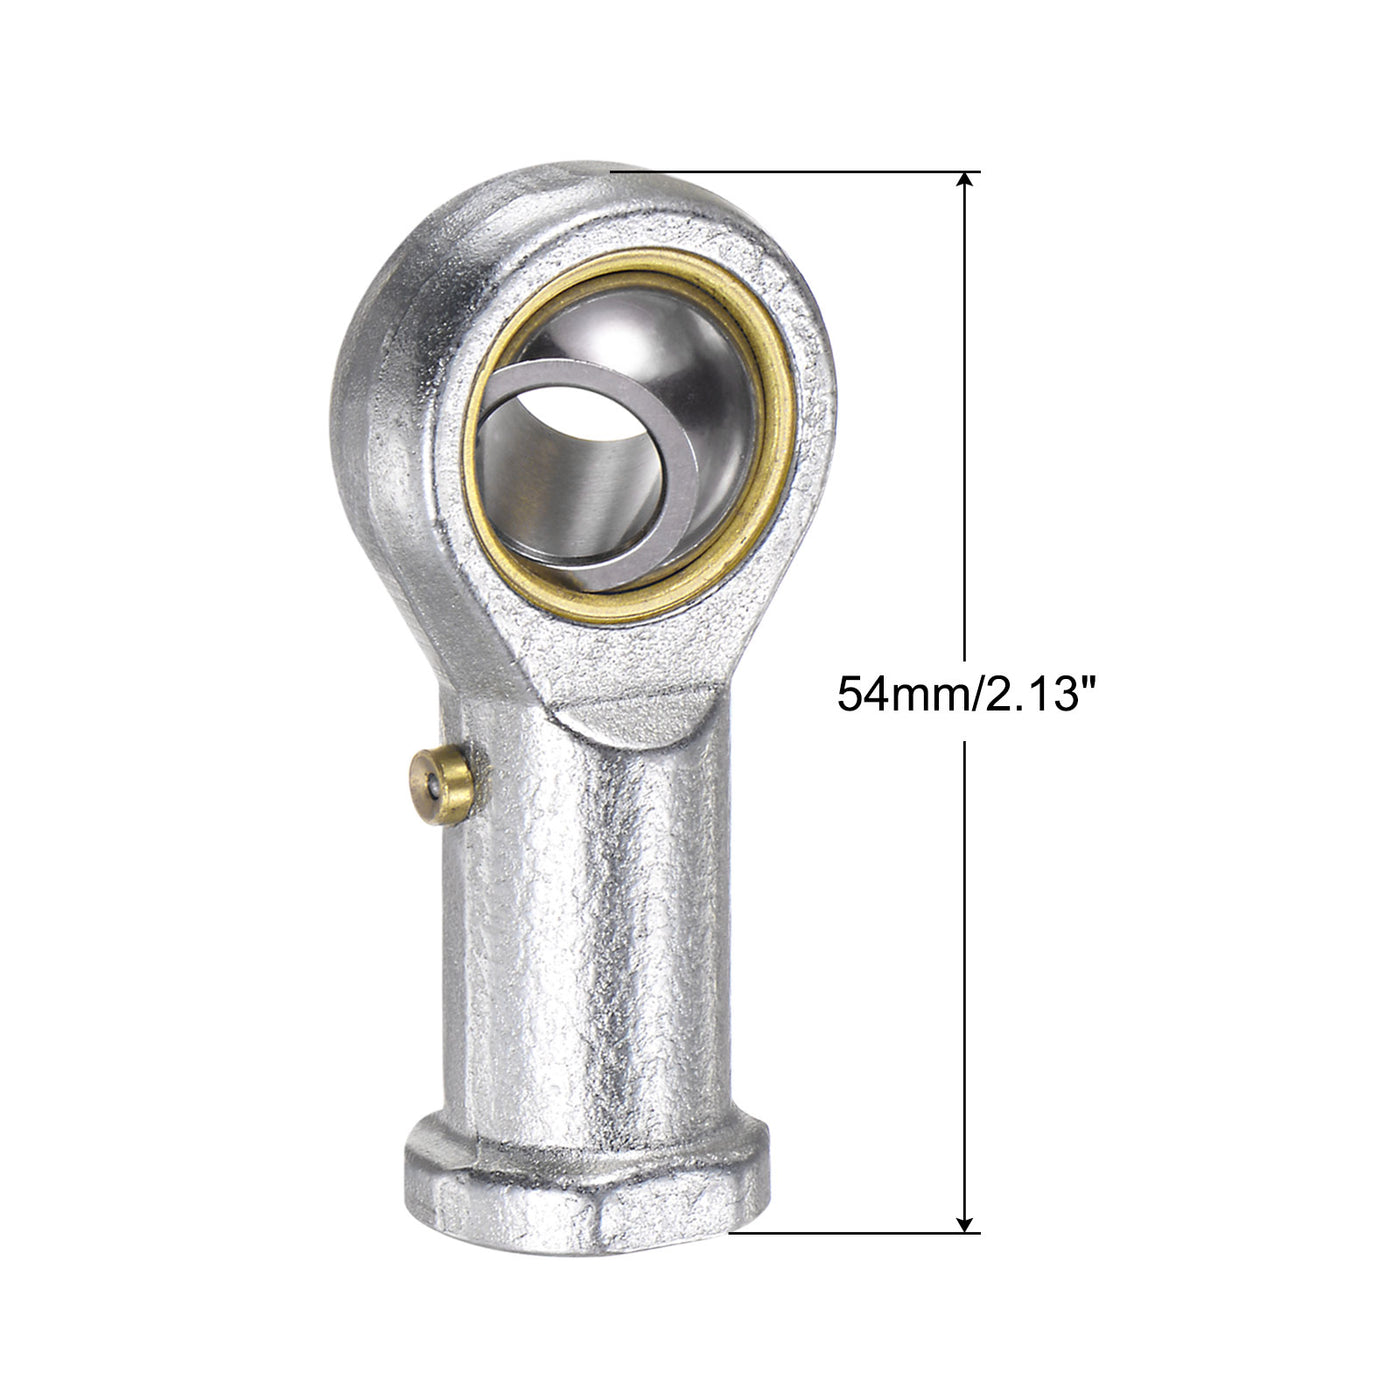 uxcell Uxcell PHSB6 Female Rod End 3/8" Bore and 3/8-24 Left Hand Thread,Includes Jam Nut